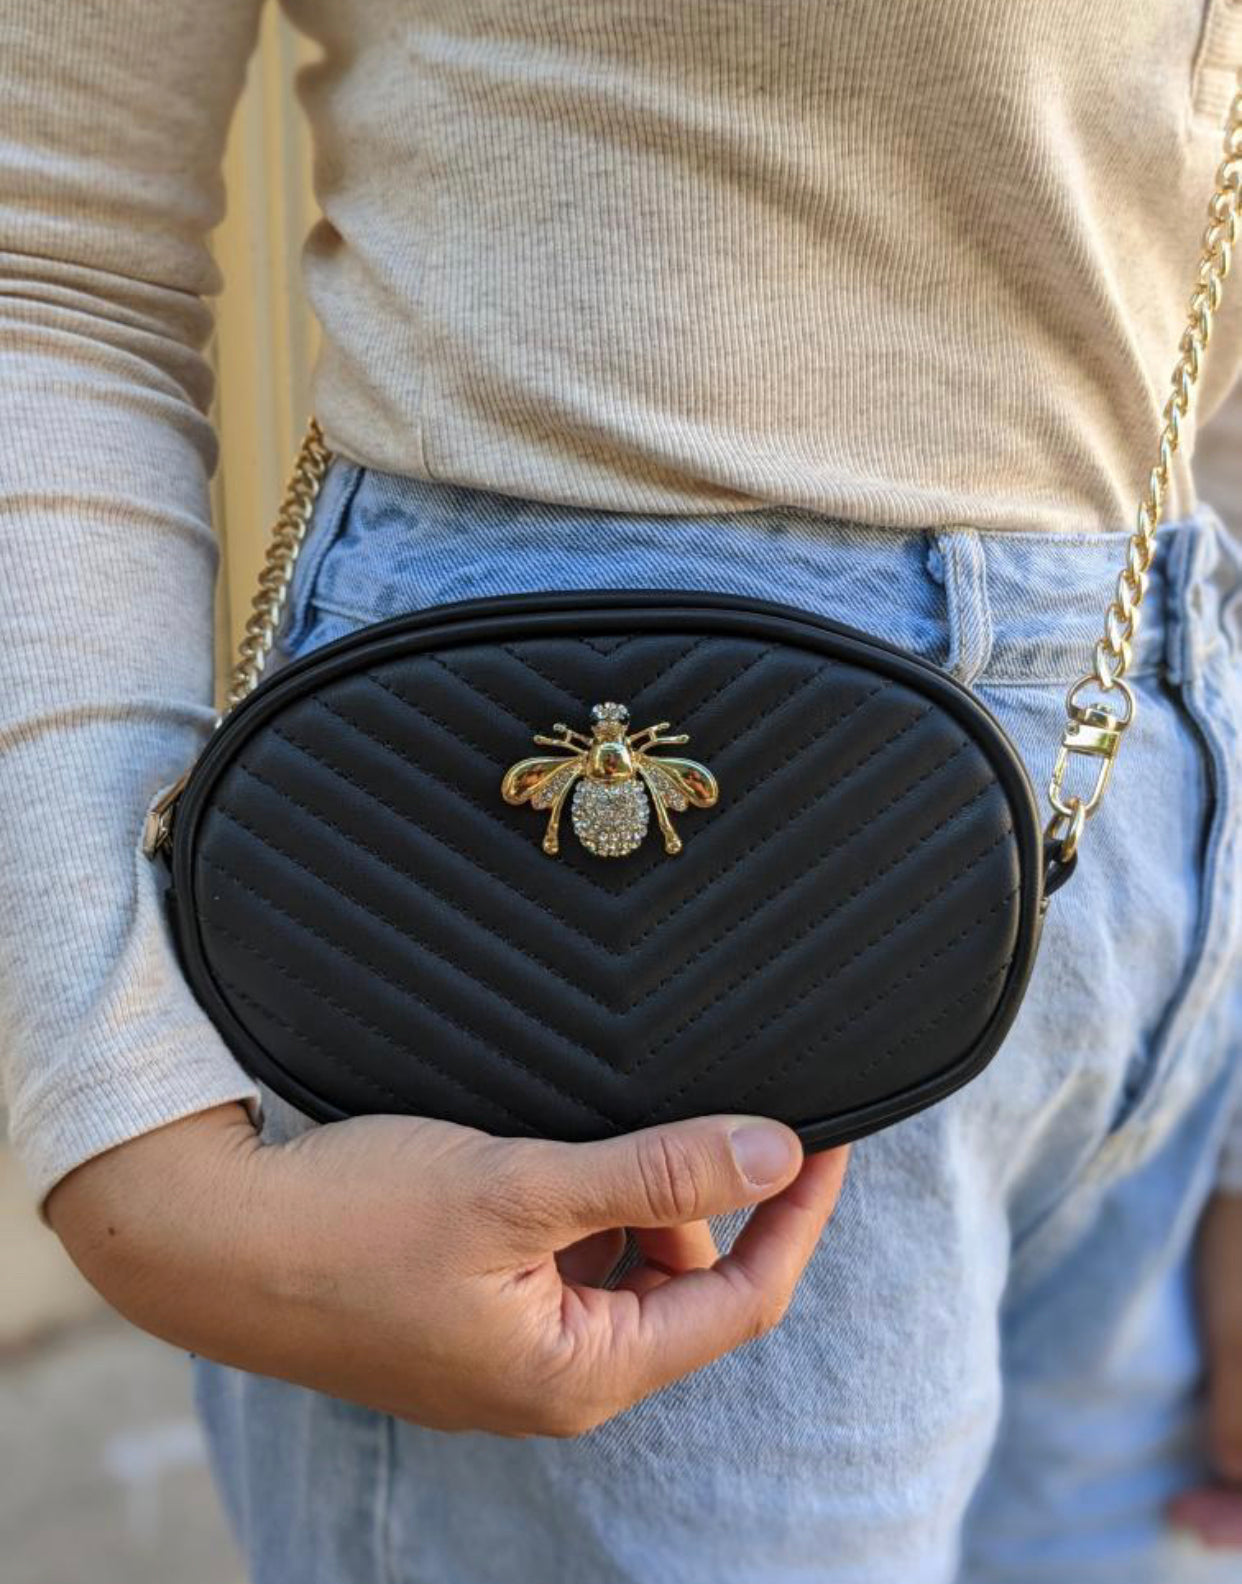 Multitasker - 6 ways to wear belt bag/bag with a choice of bee embellishments